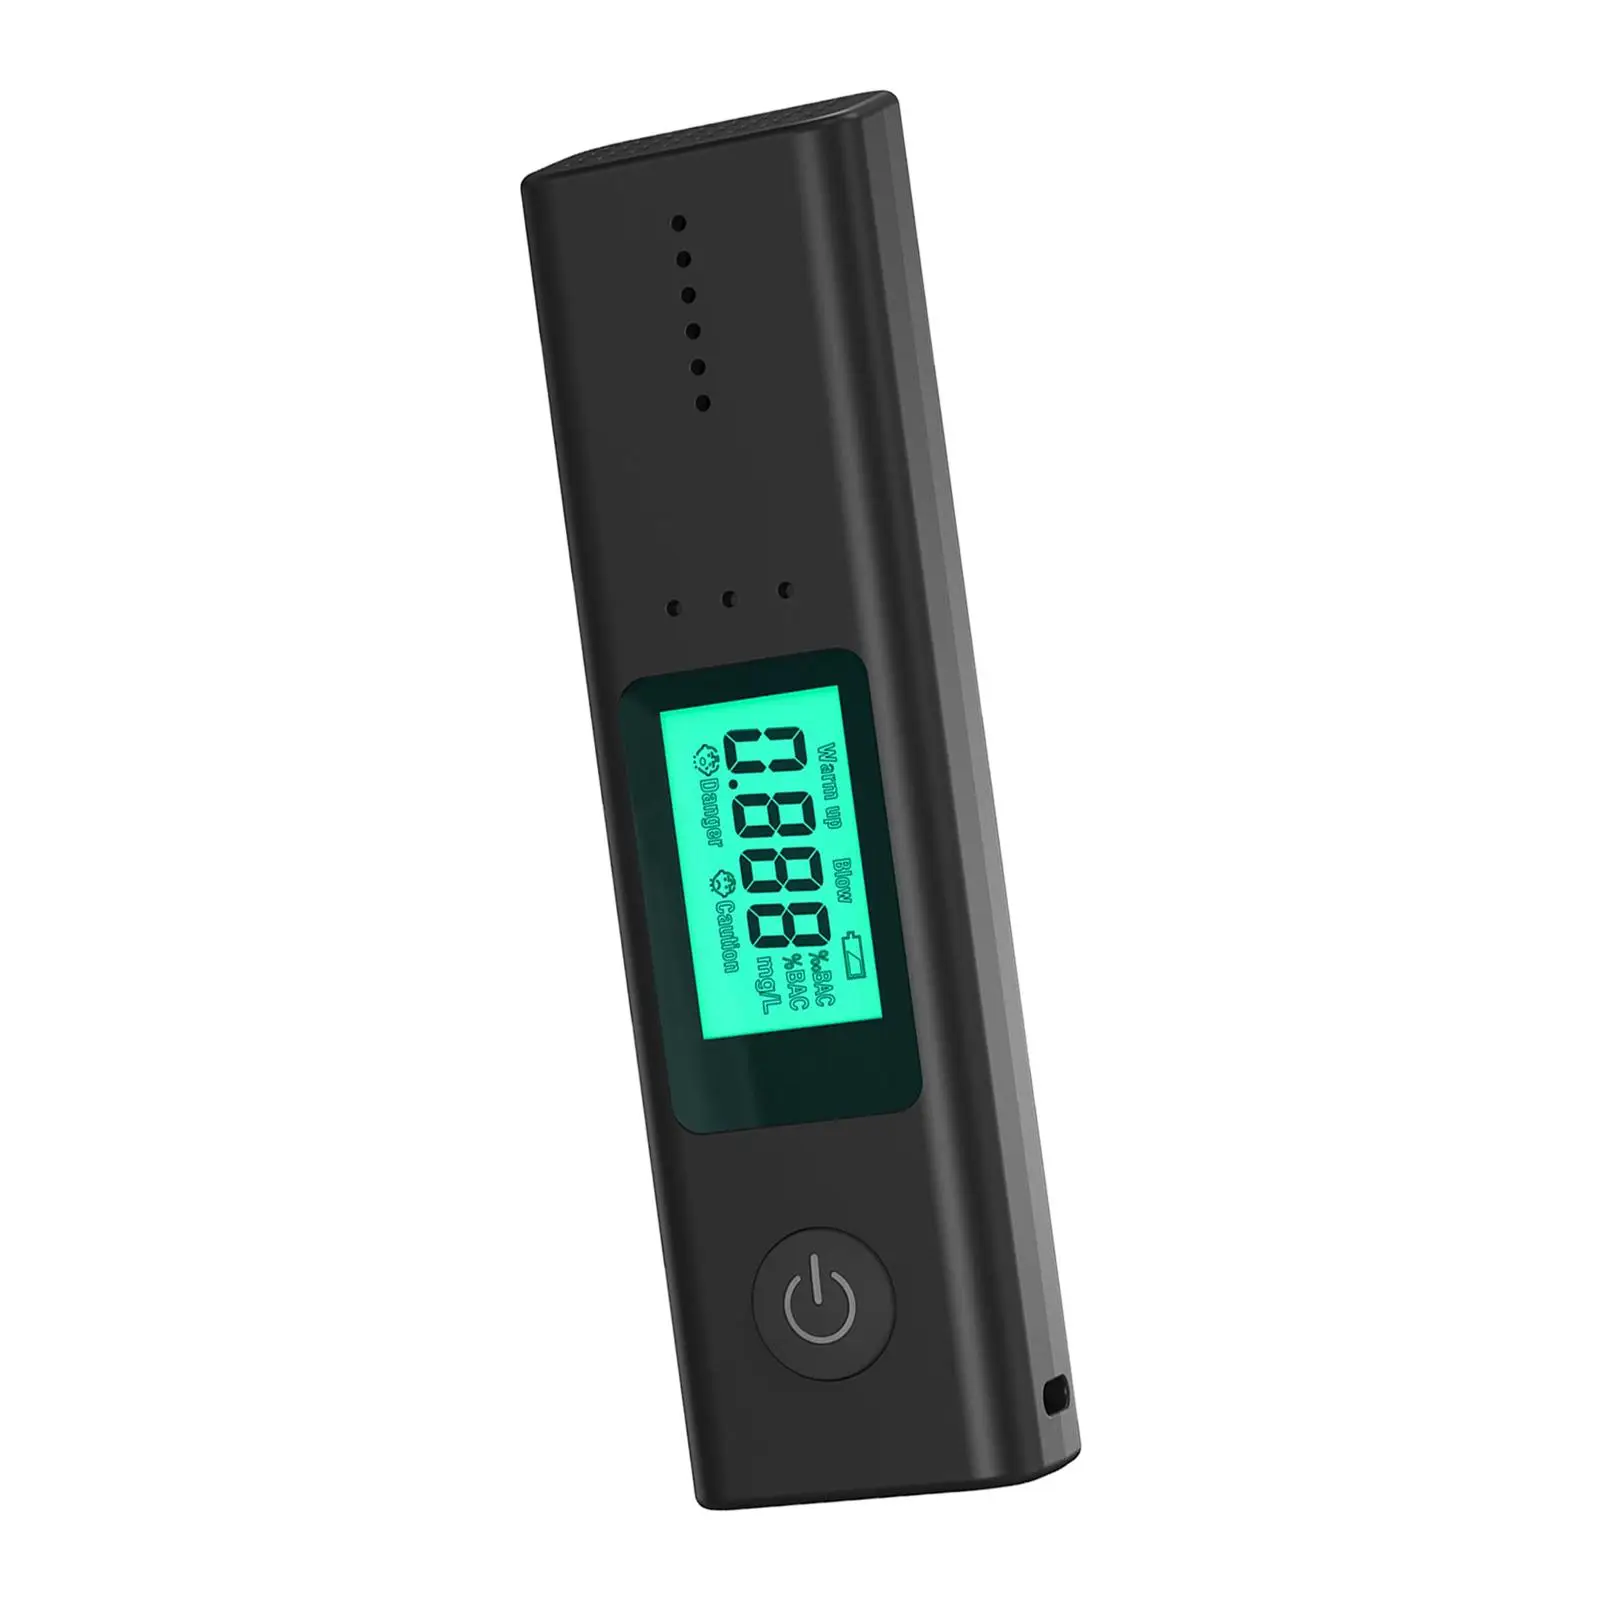 Digital Breath Alcohol Tester Breathalyzers Contactless Portable Detector Meter for Professional Use Personal Alcohol Test Tools